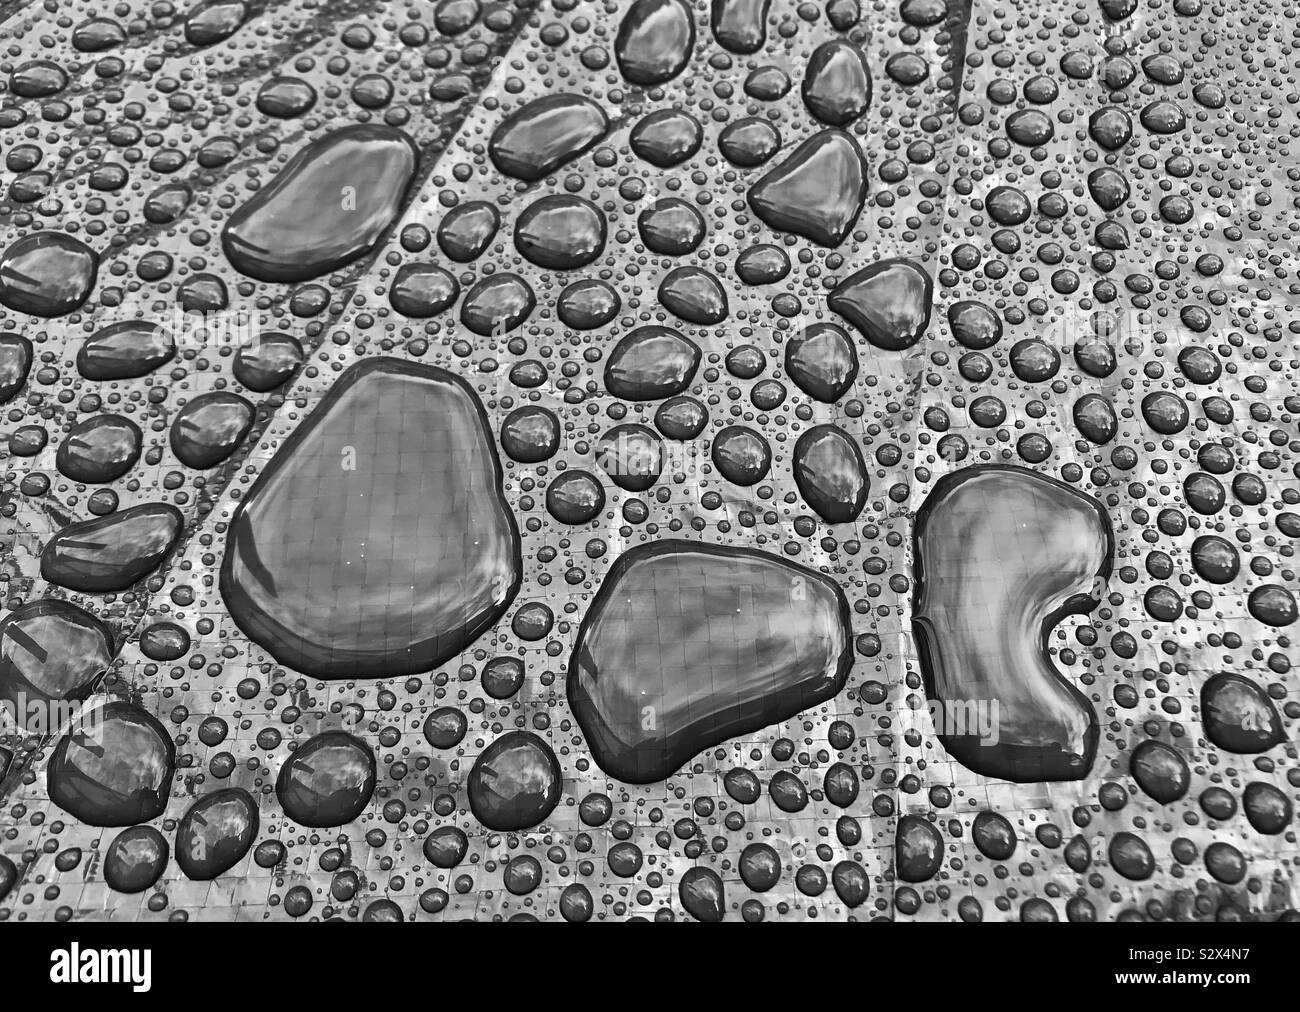 Globules of water on a shiny surface after a heavy shower of rain Stock Photo